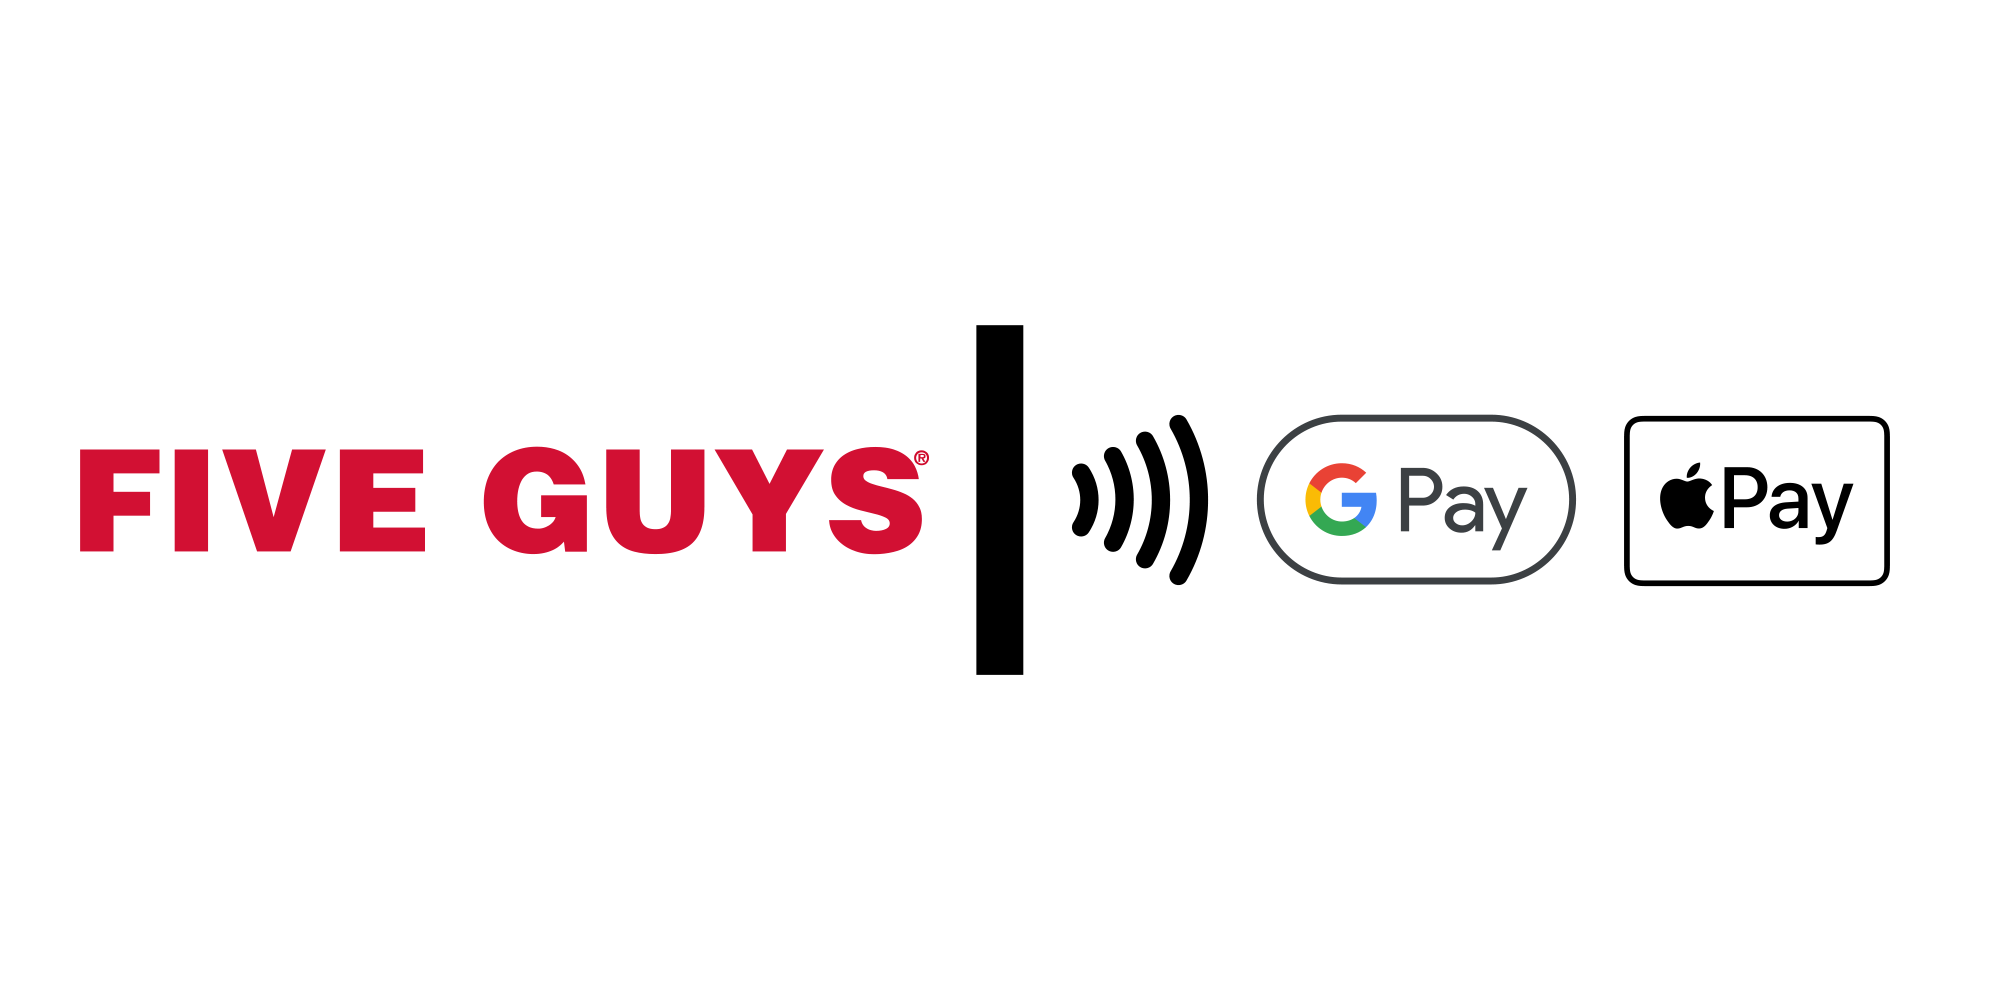 Five Guys accepts contactless payments, as well as Google Pay & Apple Pay online/in-app.